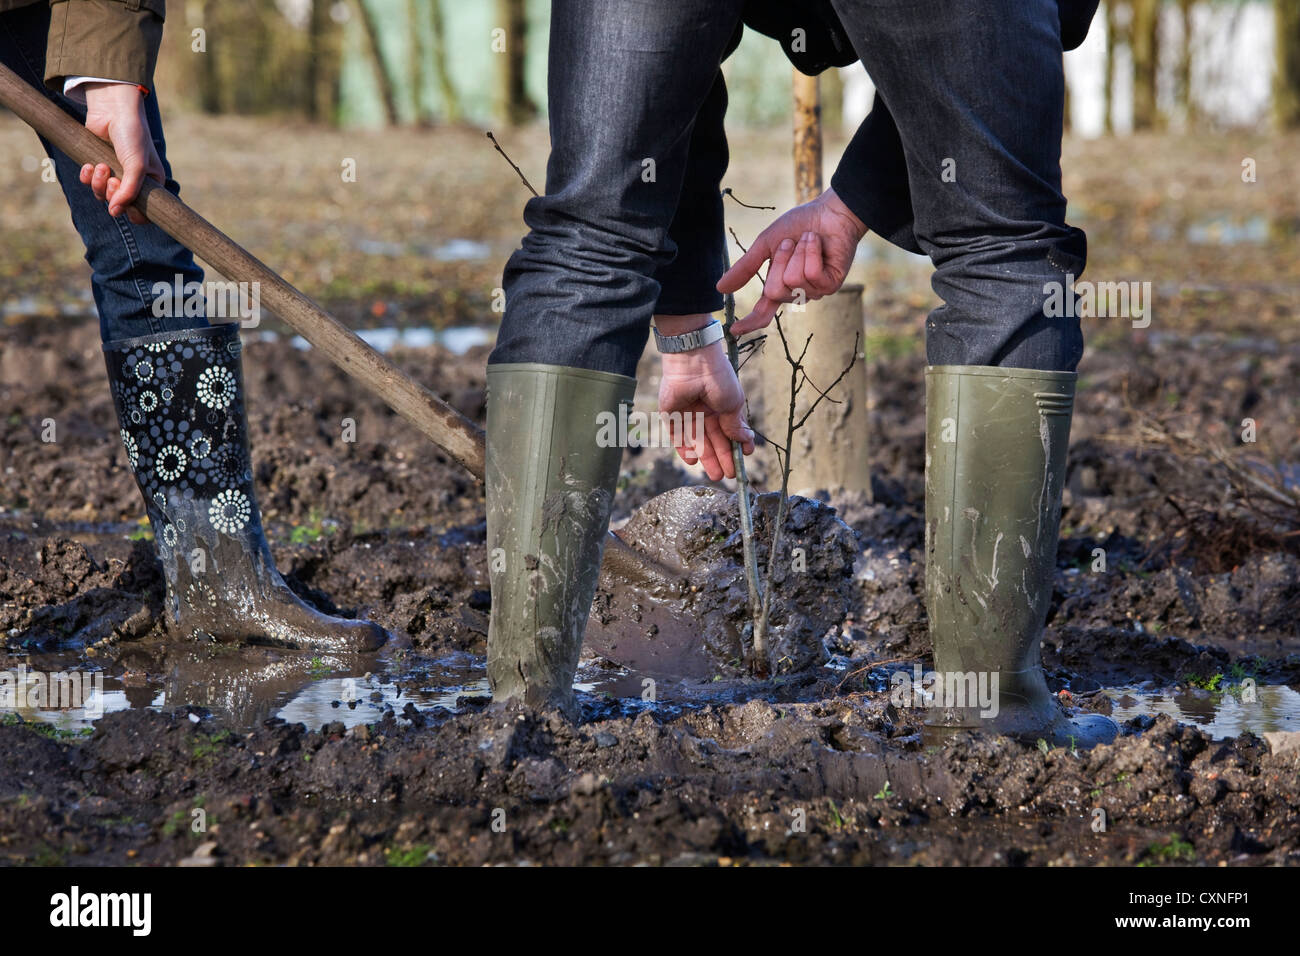 Man wearing rubber boots / wellies planting tree with shovel in muddy soil  Stock Photo - Alamy